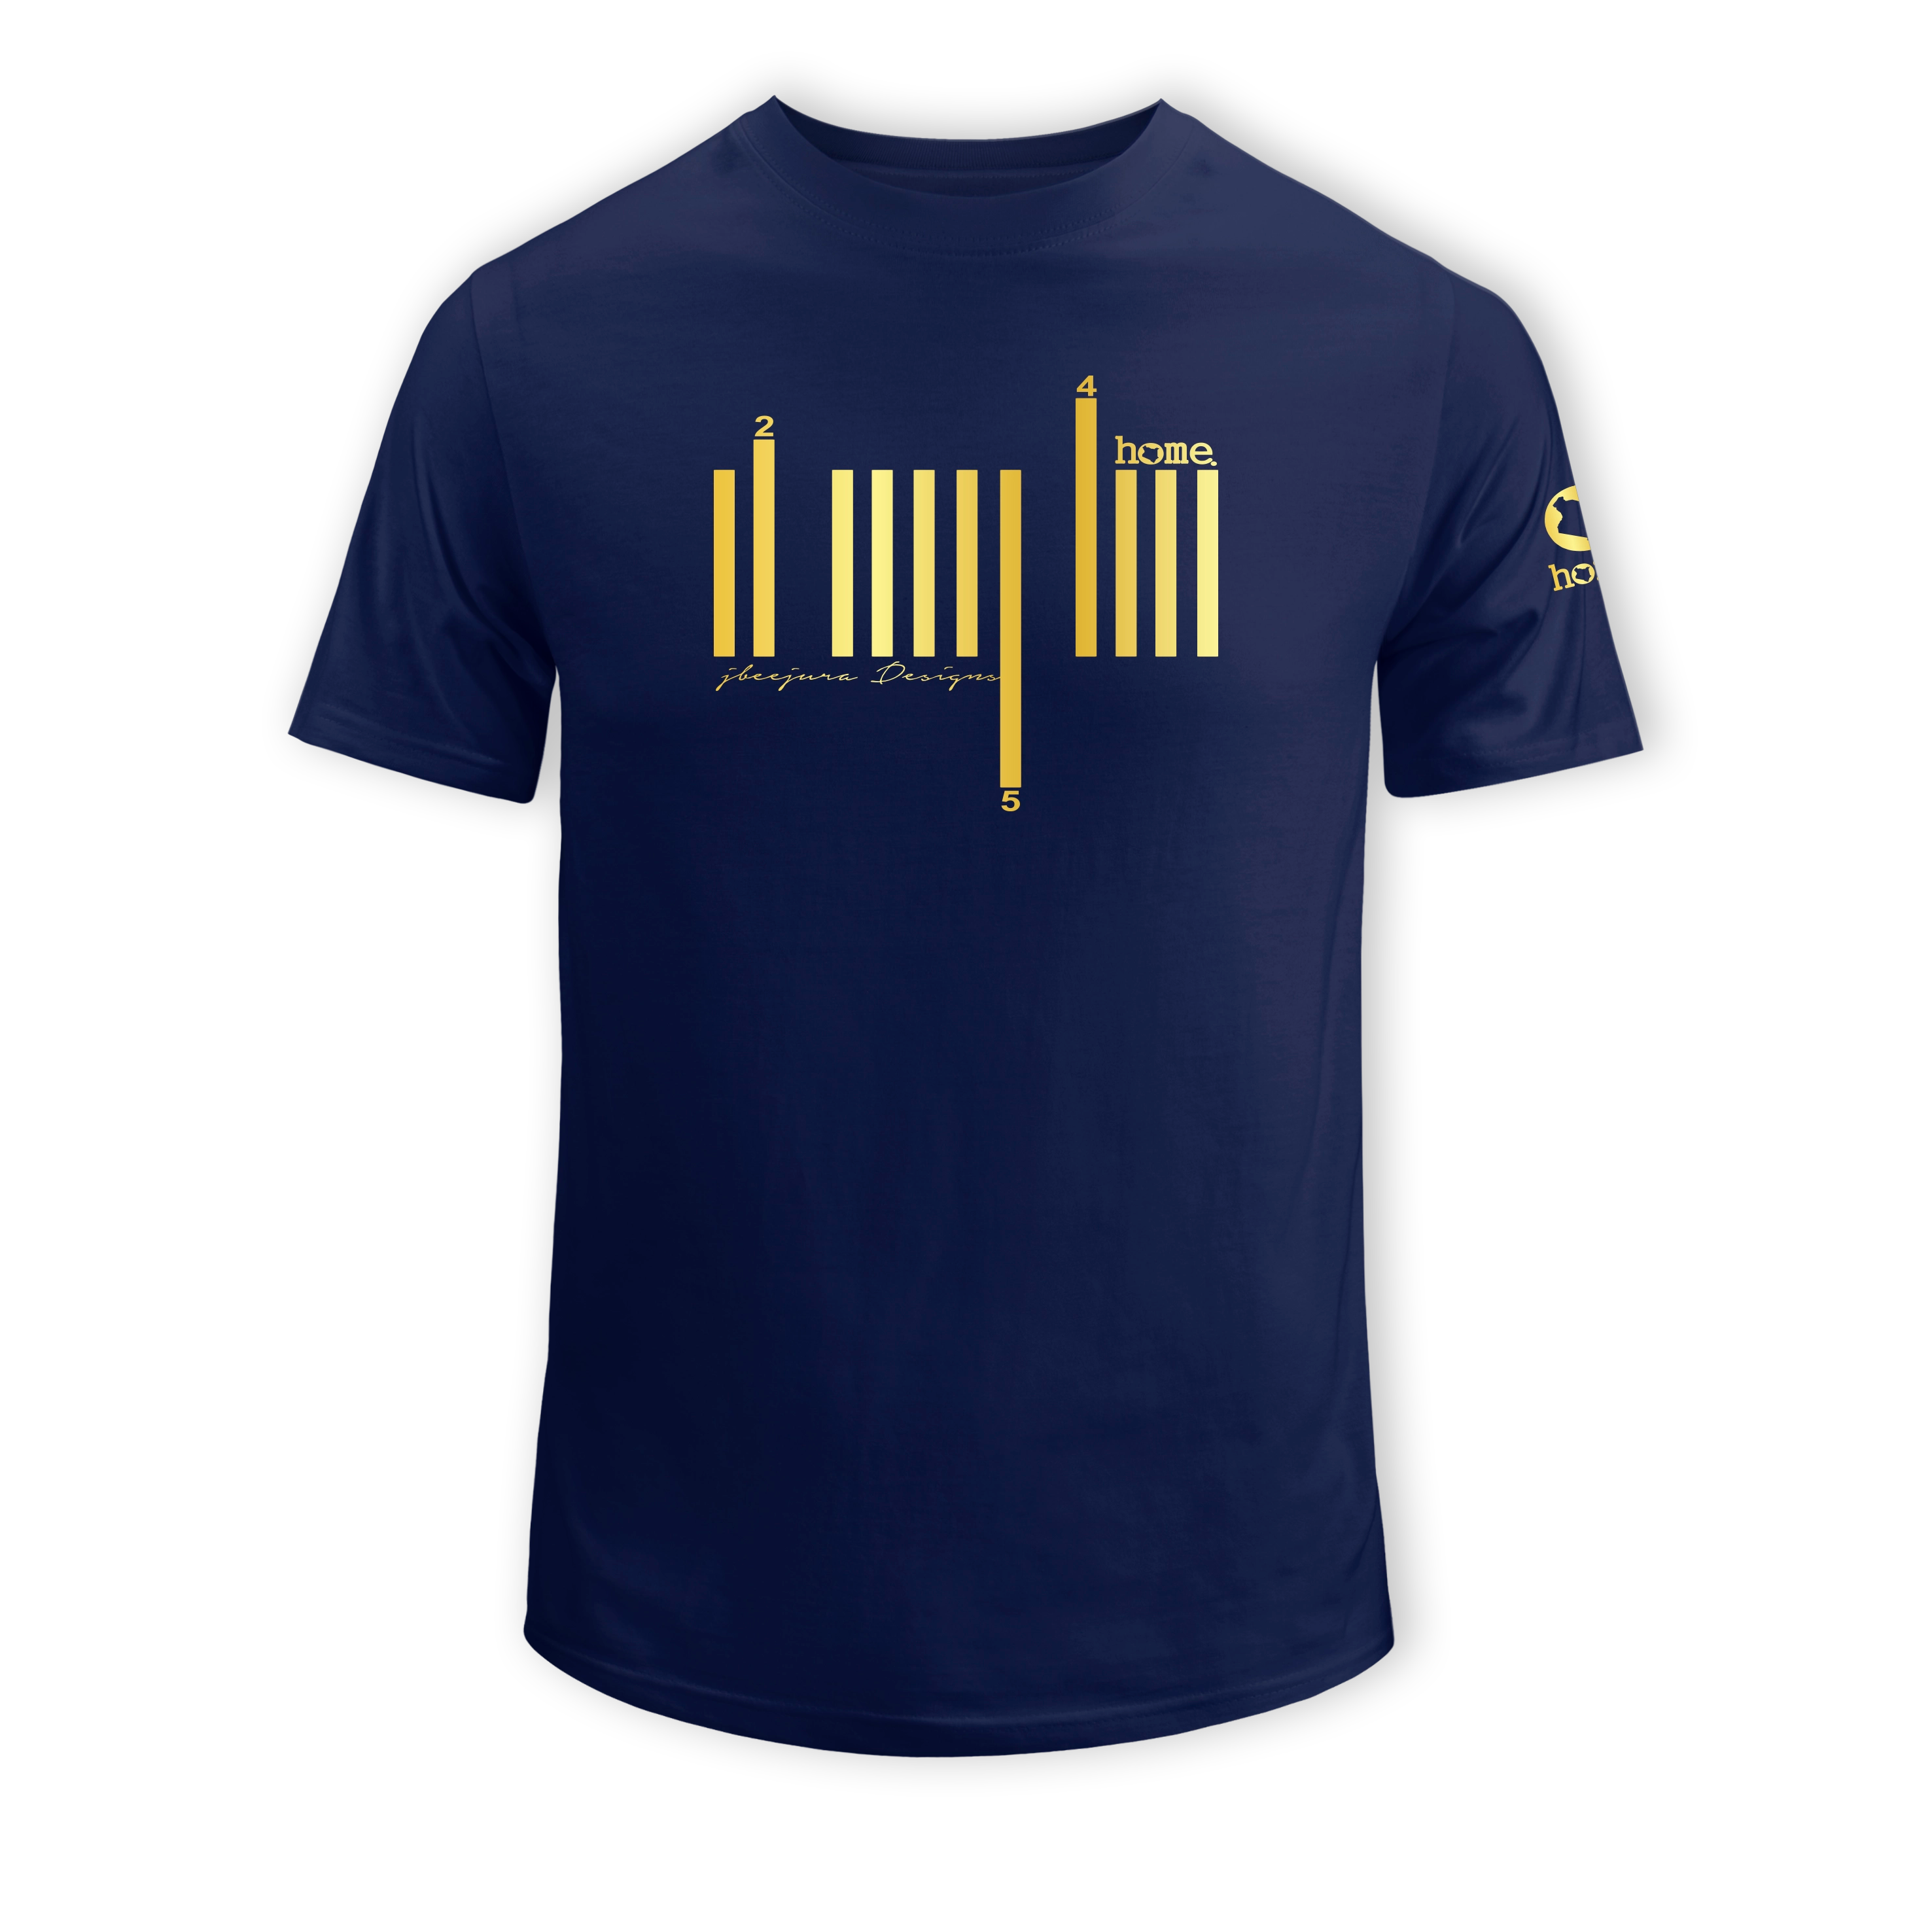 home_254 SHORT-SLEEVED NAVY BLUE T-SHIRT WITH A GOLD BARS PRINT – COTTON PLUS FABRIC